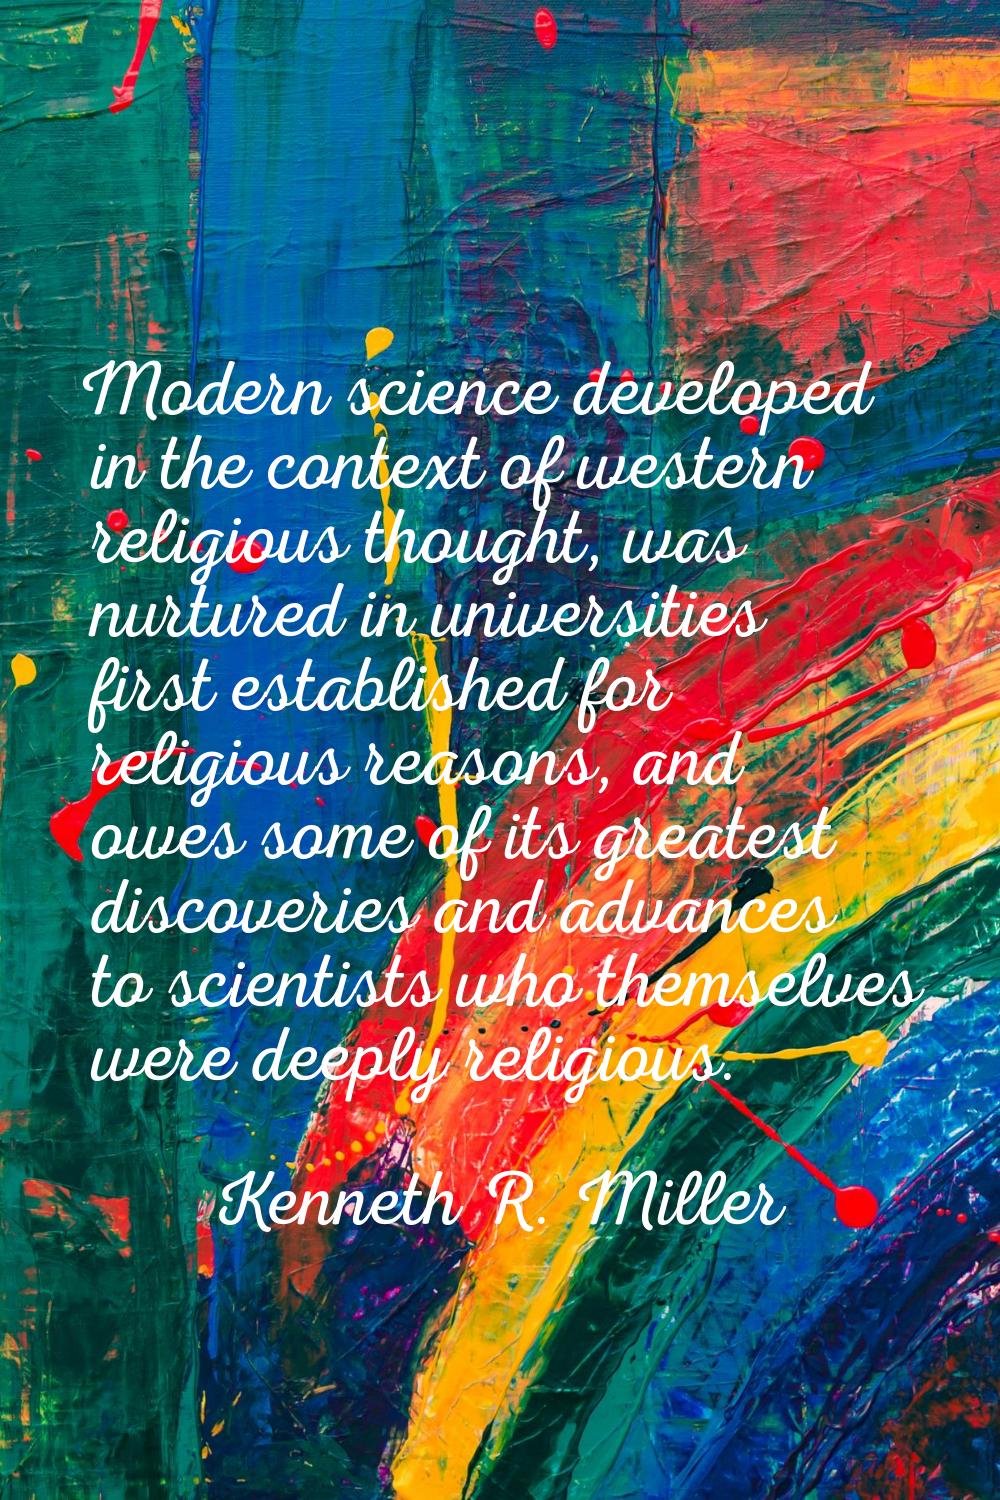 Modern science developed in the context of western religious thought, was nurtured in universities 